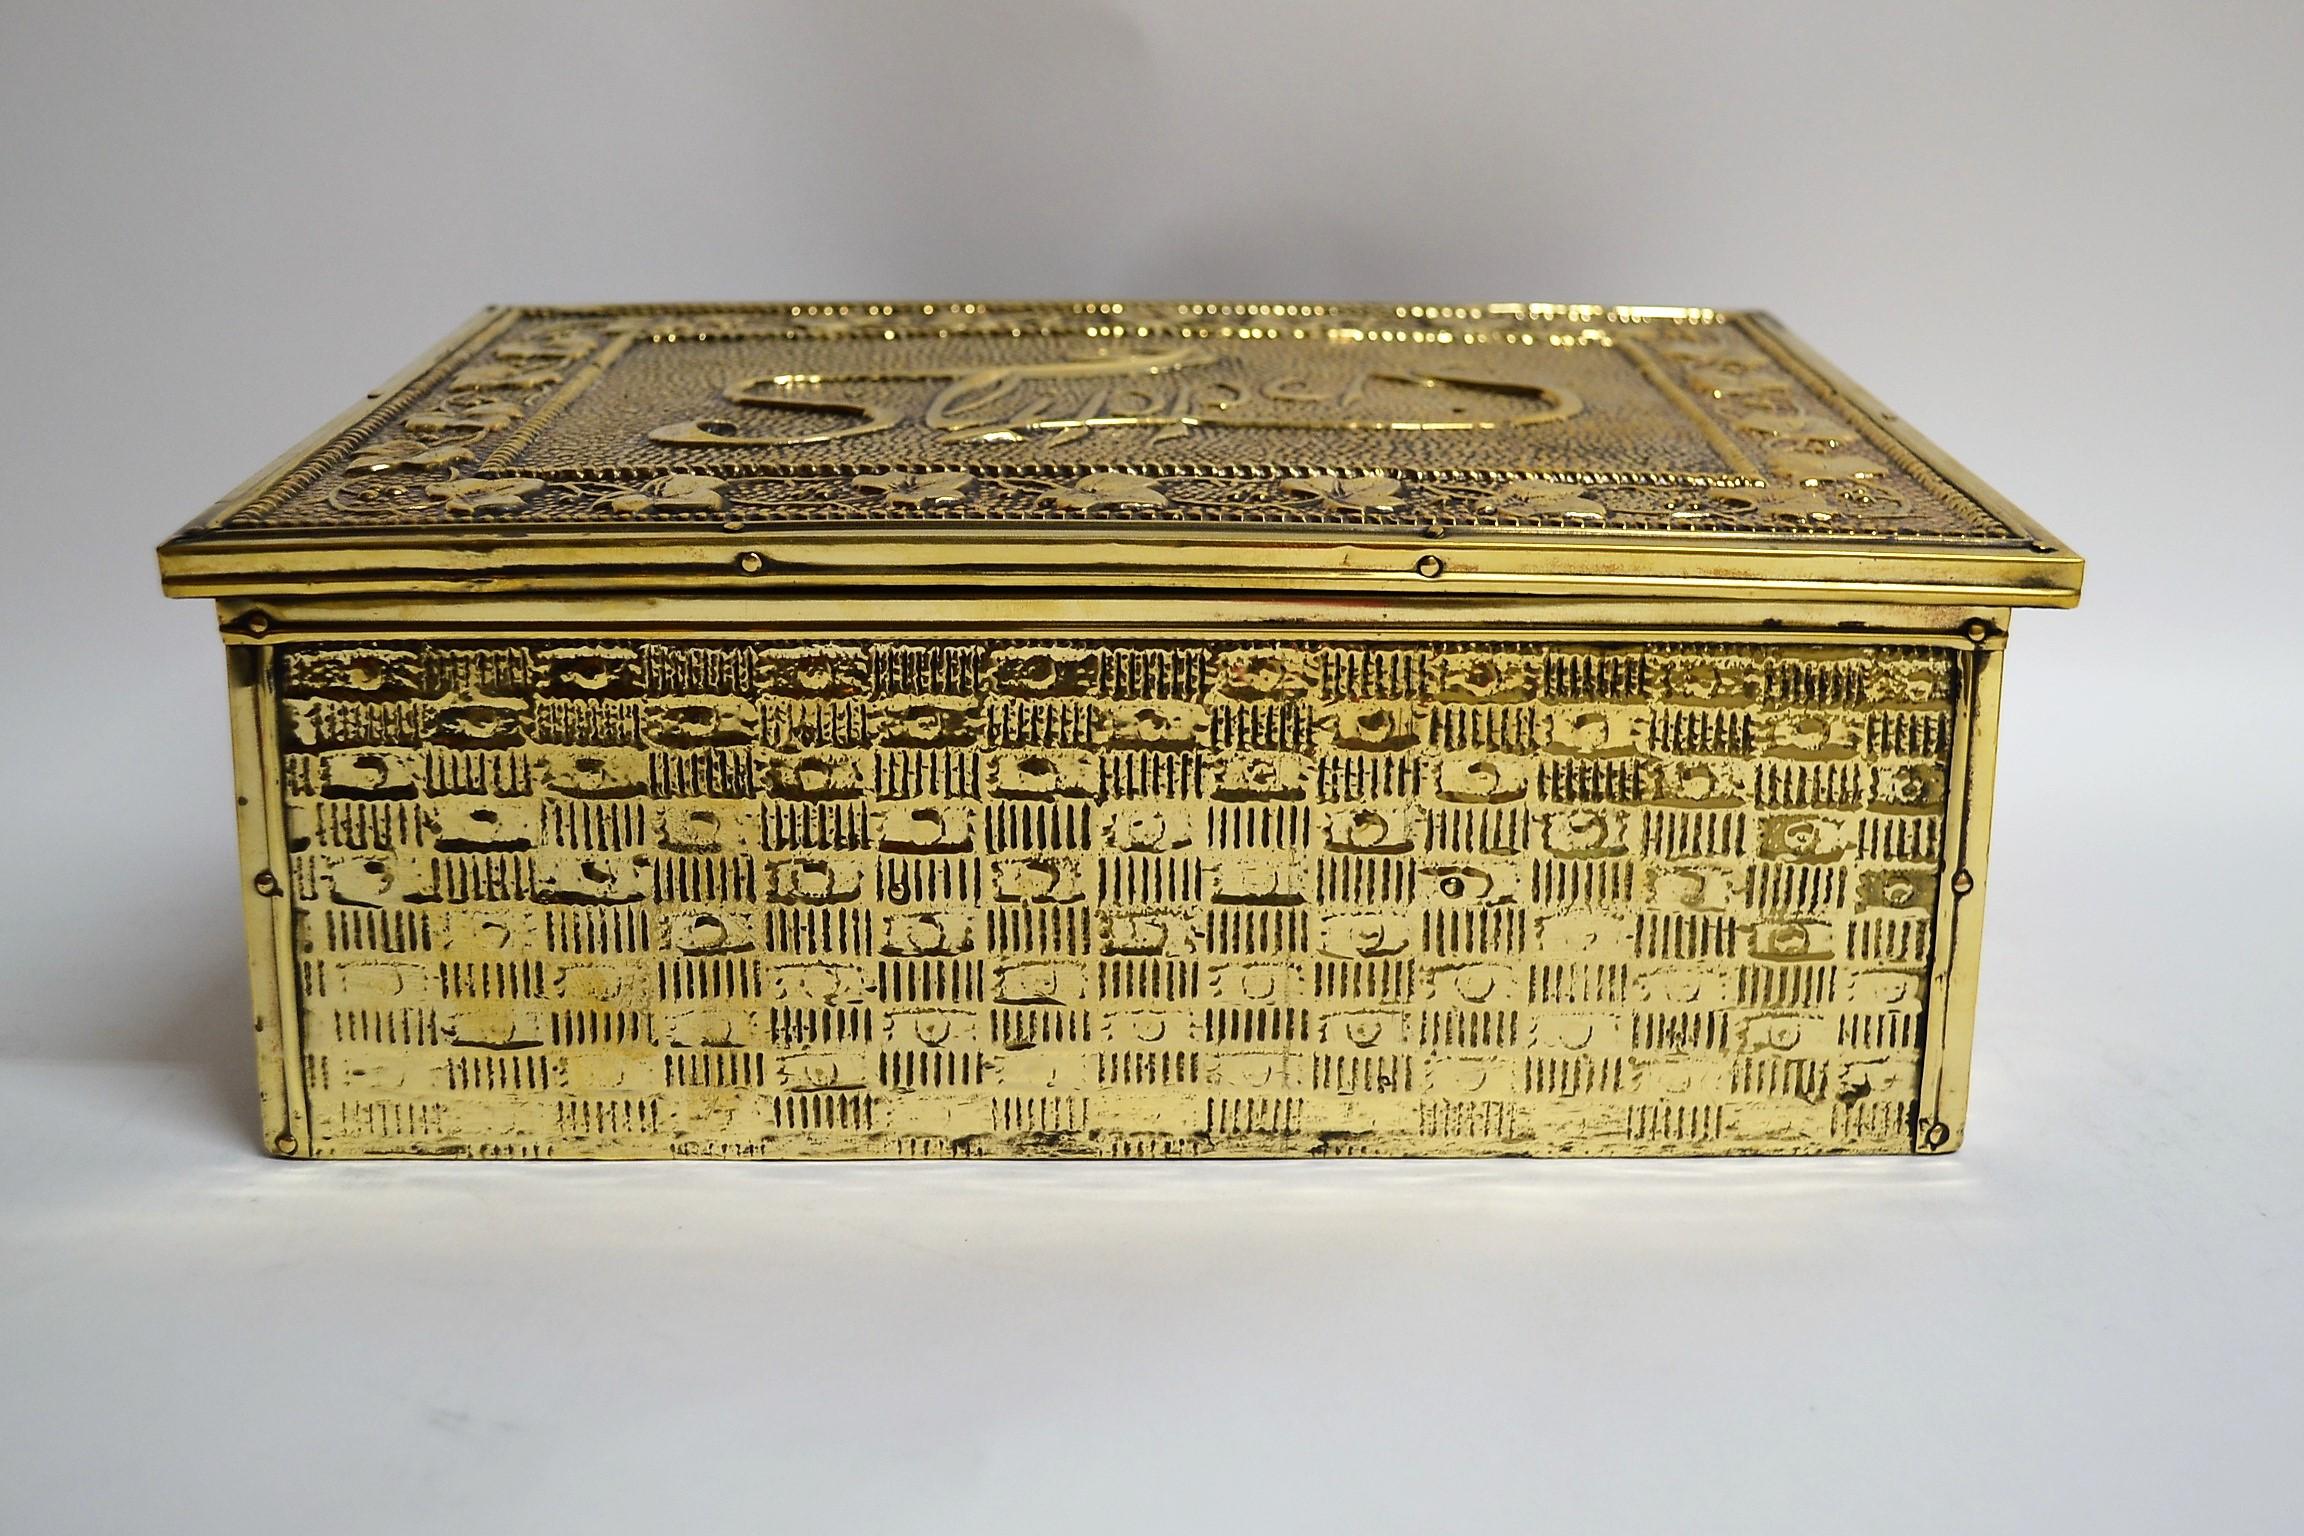 Antique English brass slipper box. This box is lined with wood, and it would have been placed near the fireplace to warm one's slippers.